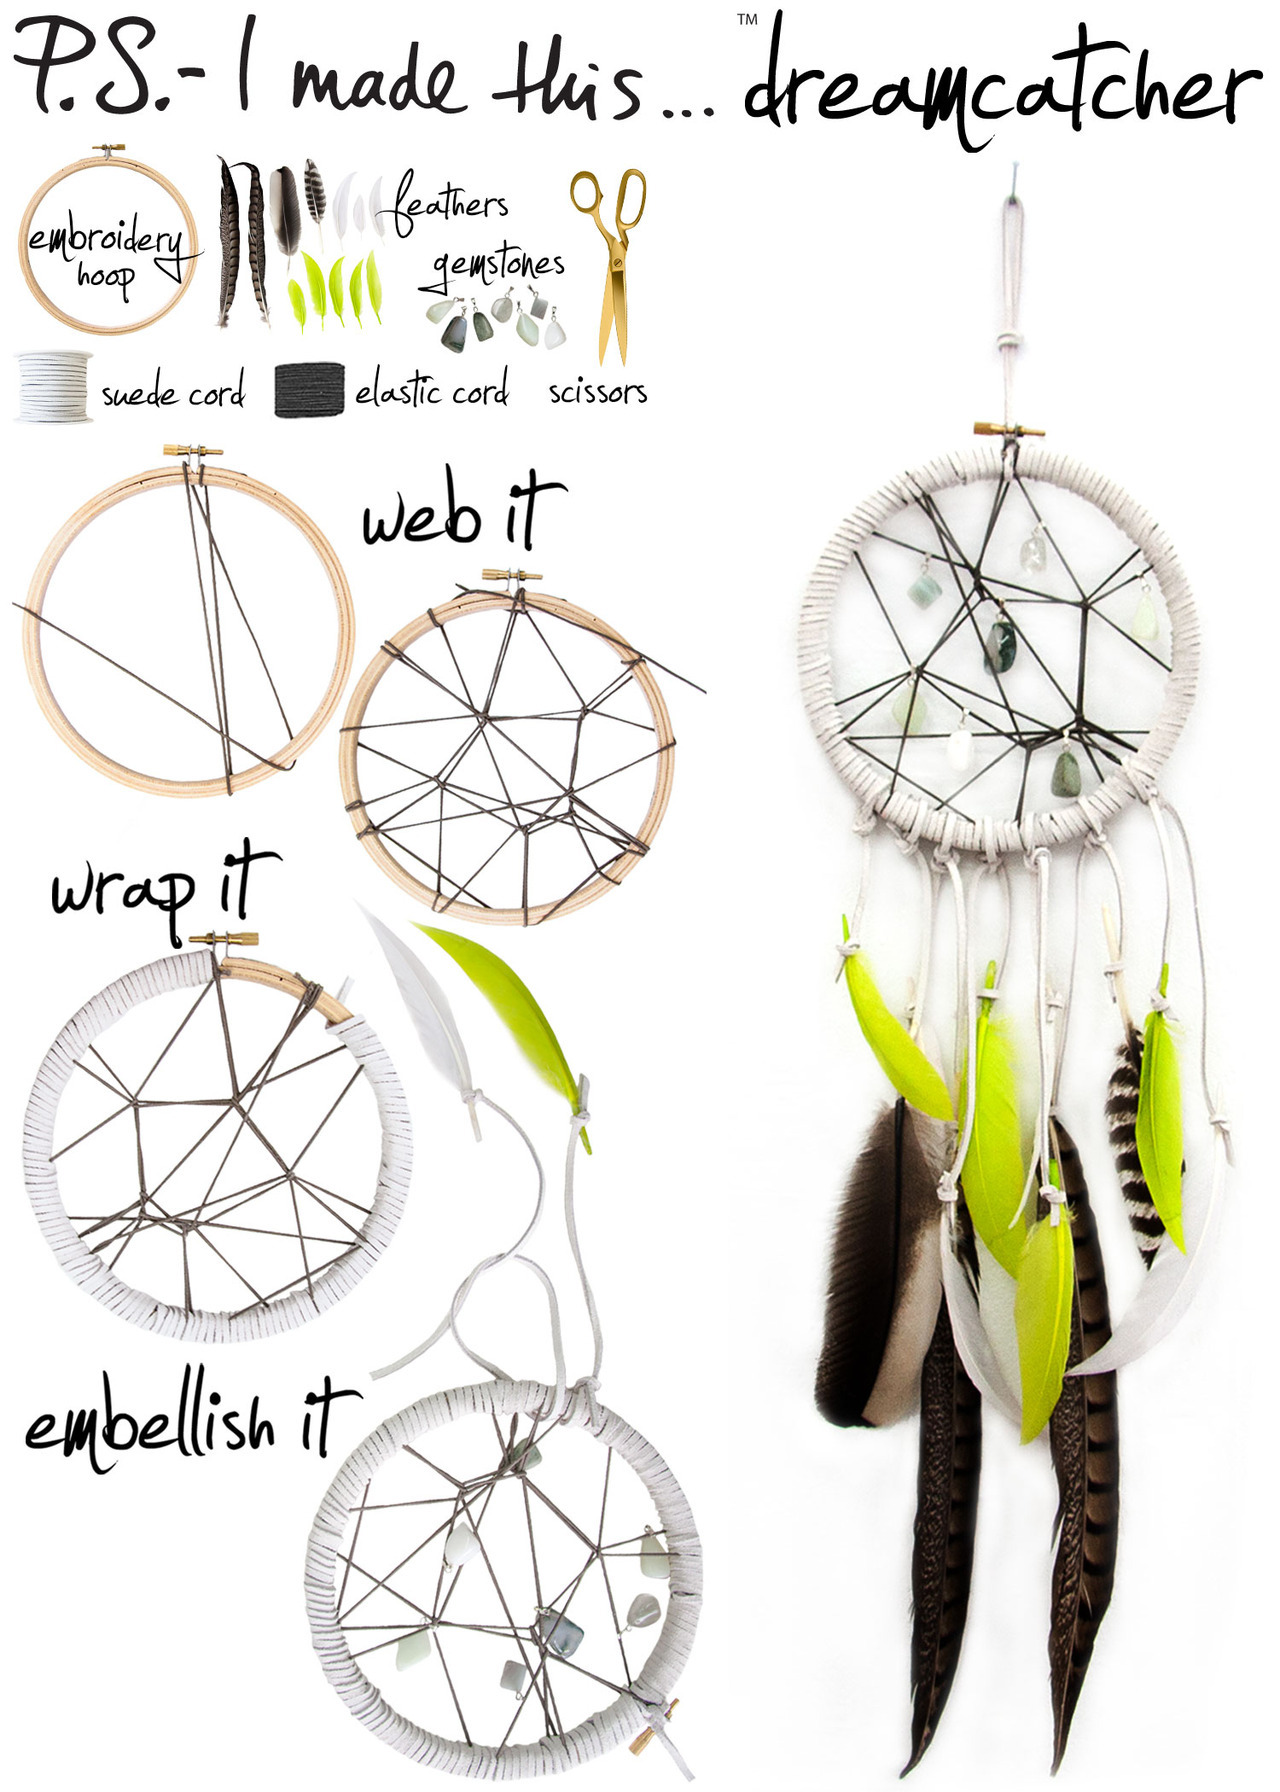 Follow your DIY dreams and add an eclectic inspiring touch to any room. Originating from Native American culture, dreamcatchers are said to filter out bad dreams and allow the good ones to float through. A geometric weave, bright feathers and the elegant touch of colorful stone accouterments combine to create a covetable object that&#8217;s trendy yet timeless. 
To create:  Web the elastic cord around the embroidery hoop - get inspired by structured spider webs or intertwine your own unique organic shape. Secure the web and wrap the frame of the embroidery hoop with suede cord. Embellish the web with gemstones or beads. Finish off by tying scrap suede cord in a variety of lengths to the bottom of the hoop and dangle an assortment of feathers. 